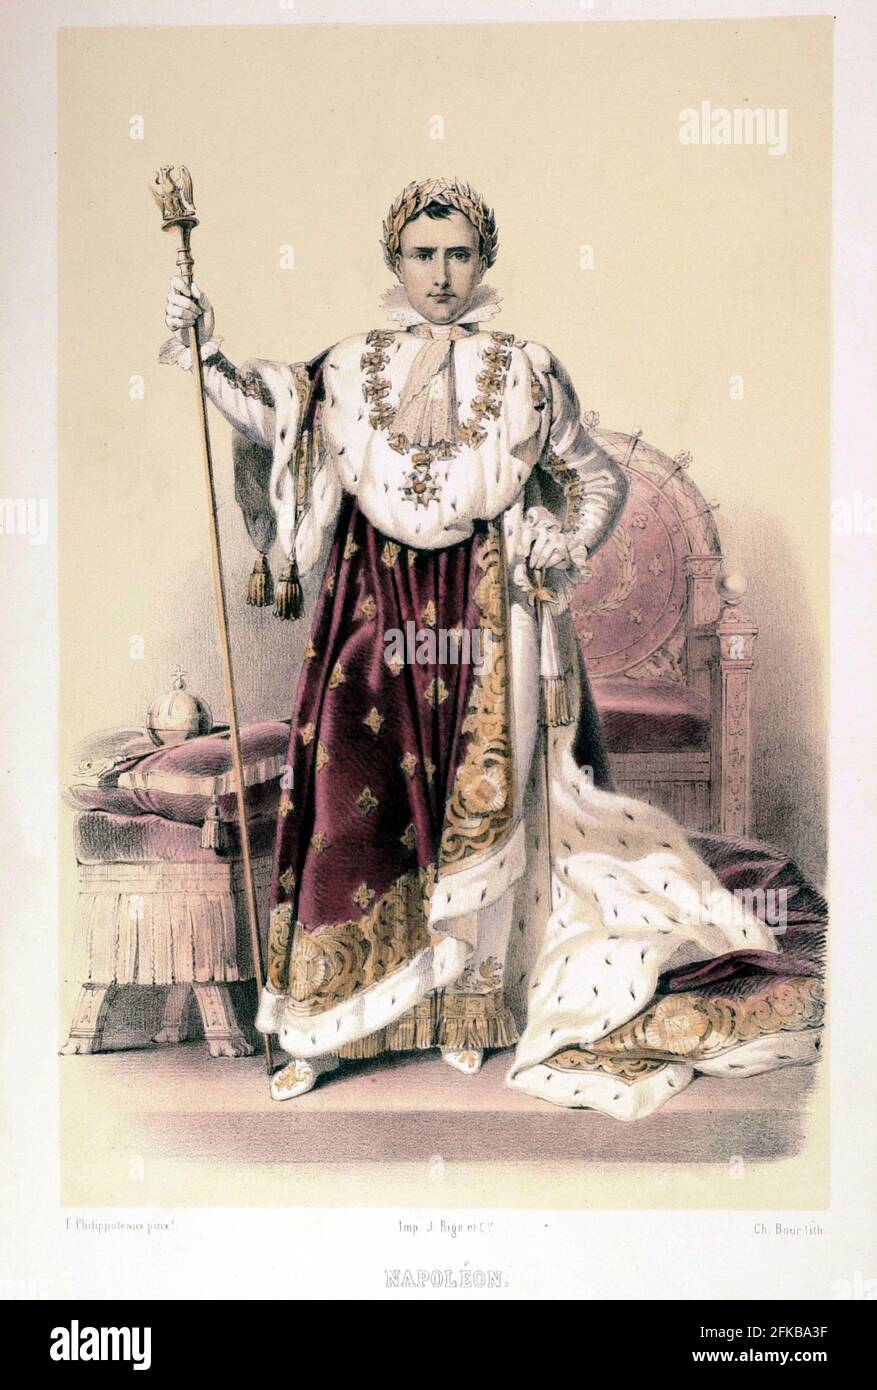 Napoleon I. 1769-1821. Emperor of France (1804-1815). Wearing his coronation gown. Le siècle de Napoléon (The Age of Napoleon) Paintings by F. Philippoteaux. Lithography by Ch. Bour. 1846. Stock Photo